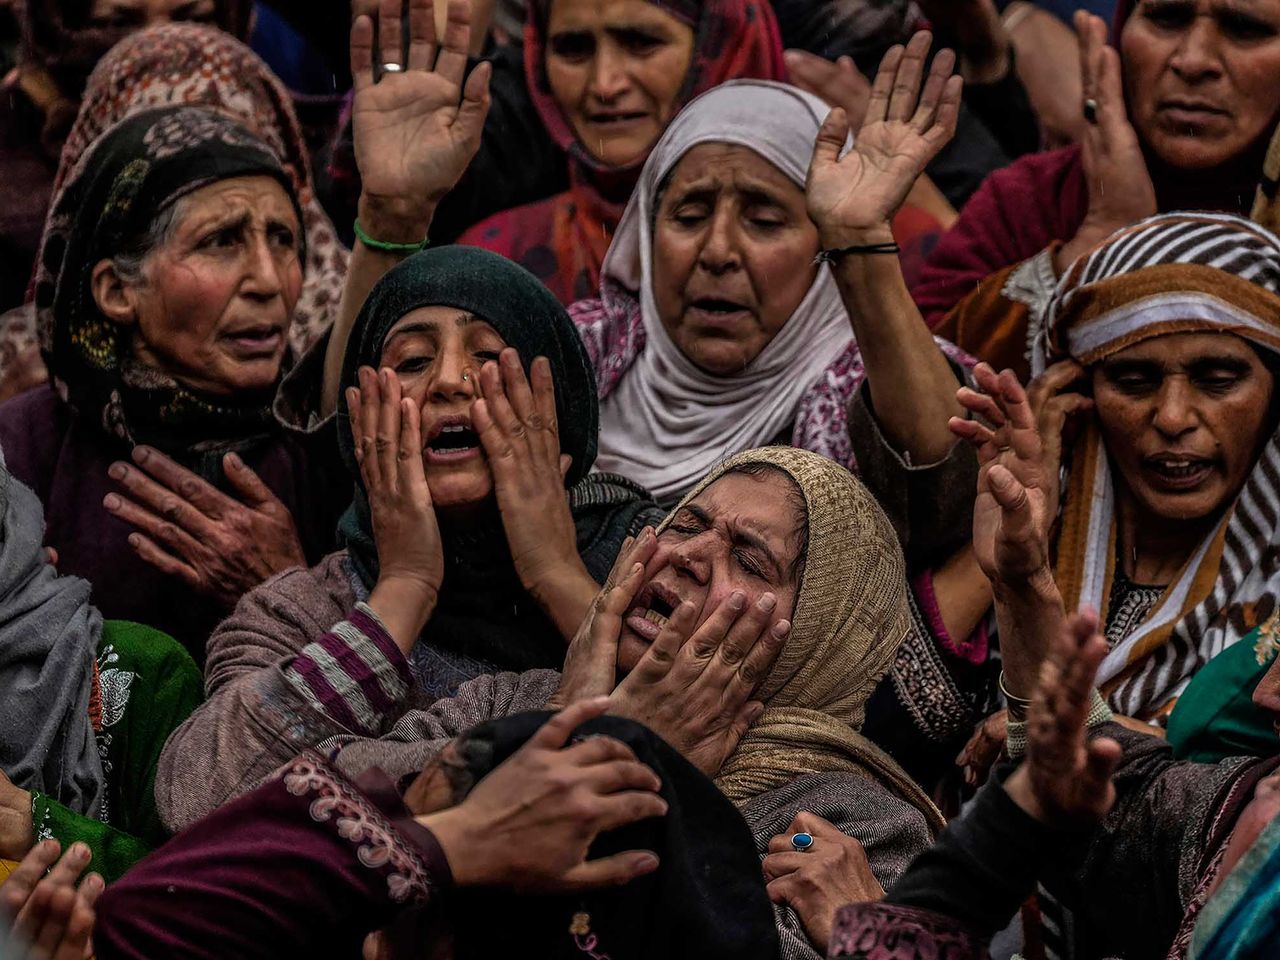 Family members and relatives mourn near the dead body of Rafia Nazir during her funeral in Srinagar, Indian controlled Kashmir, Monday, March 7, 2022. At least two civilians was killed and nearly two dozen were injured when a grenade was thrown in the middle of the crowd at a busy market in Srinagar. This project documents ongoing unrest in the long-disputed region of Kashmir, dating back to 1947, when India and Pakistan gained independence from Britain. Both nations claim Kashmir in its entirety, and each administers a portion of the region. In Indian-administered Kashmir, rebels have been fighting Indian rule for decades, seeking to unite the territory, either under Pakistani rule or as an independent country. India says that Pakistan supports armed insurgency in Kashmir. Pakistan denies the charge, saying it provides moral and diplomatic support only.